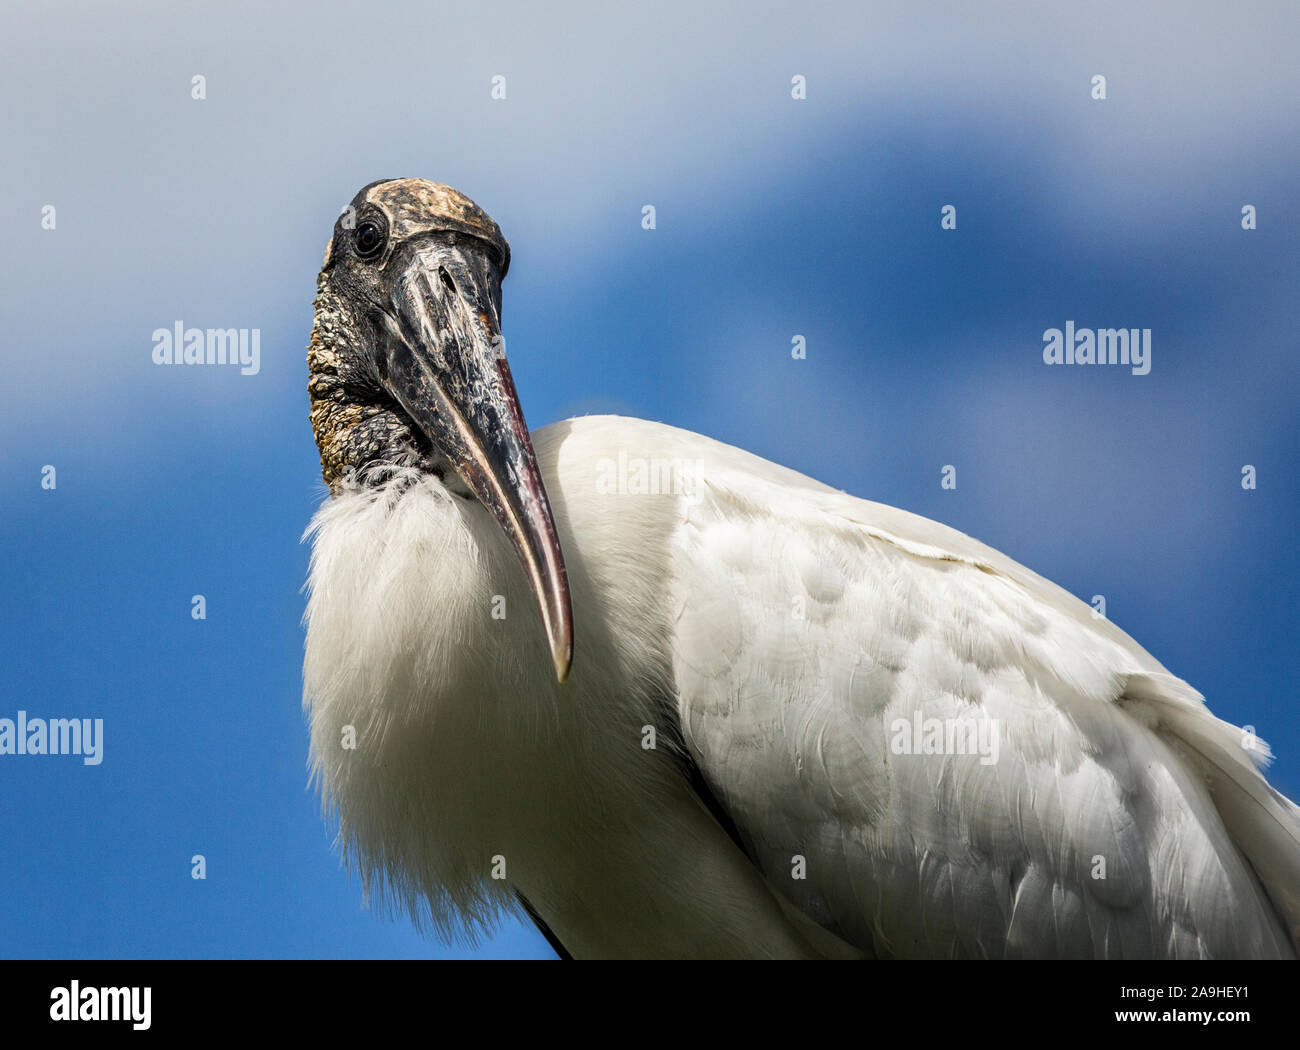 Adult Wood Stork color portrait against cloudy blue sky and inquisitive expression Stock Photo